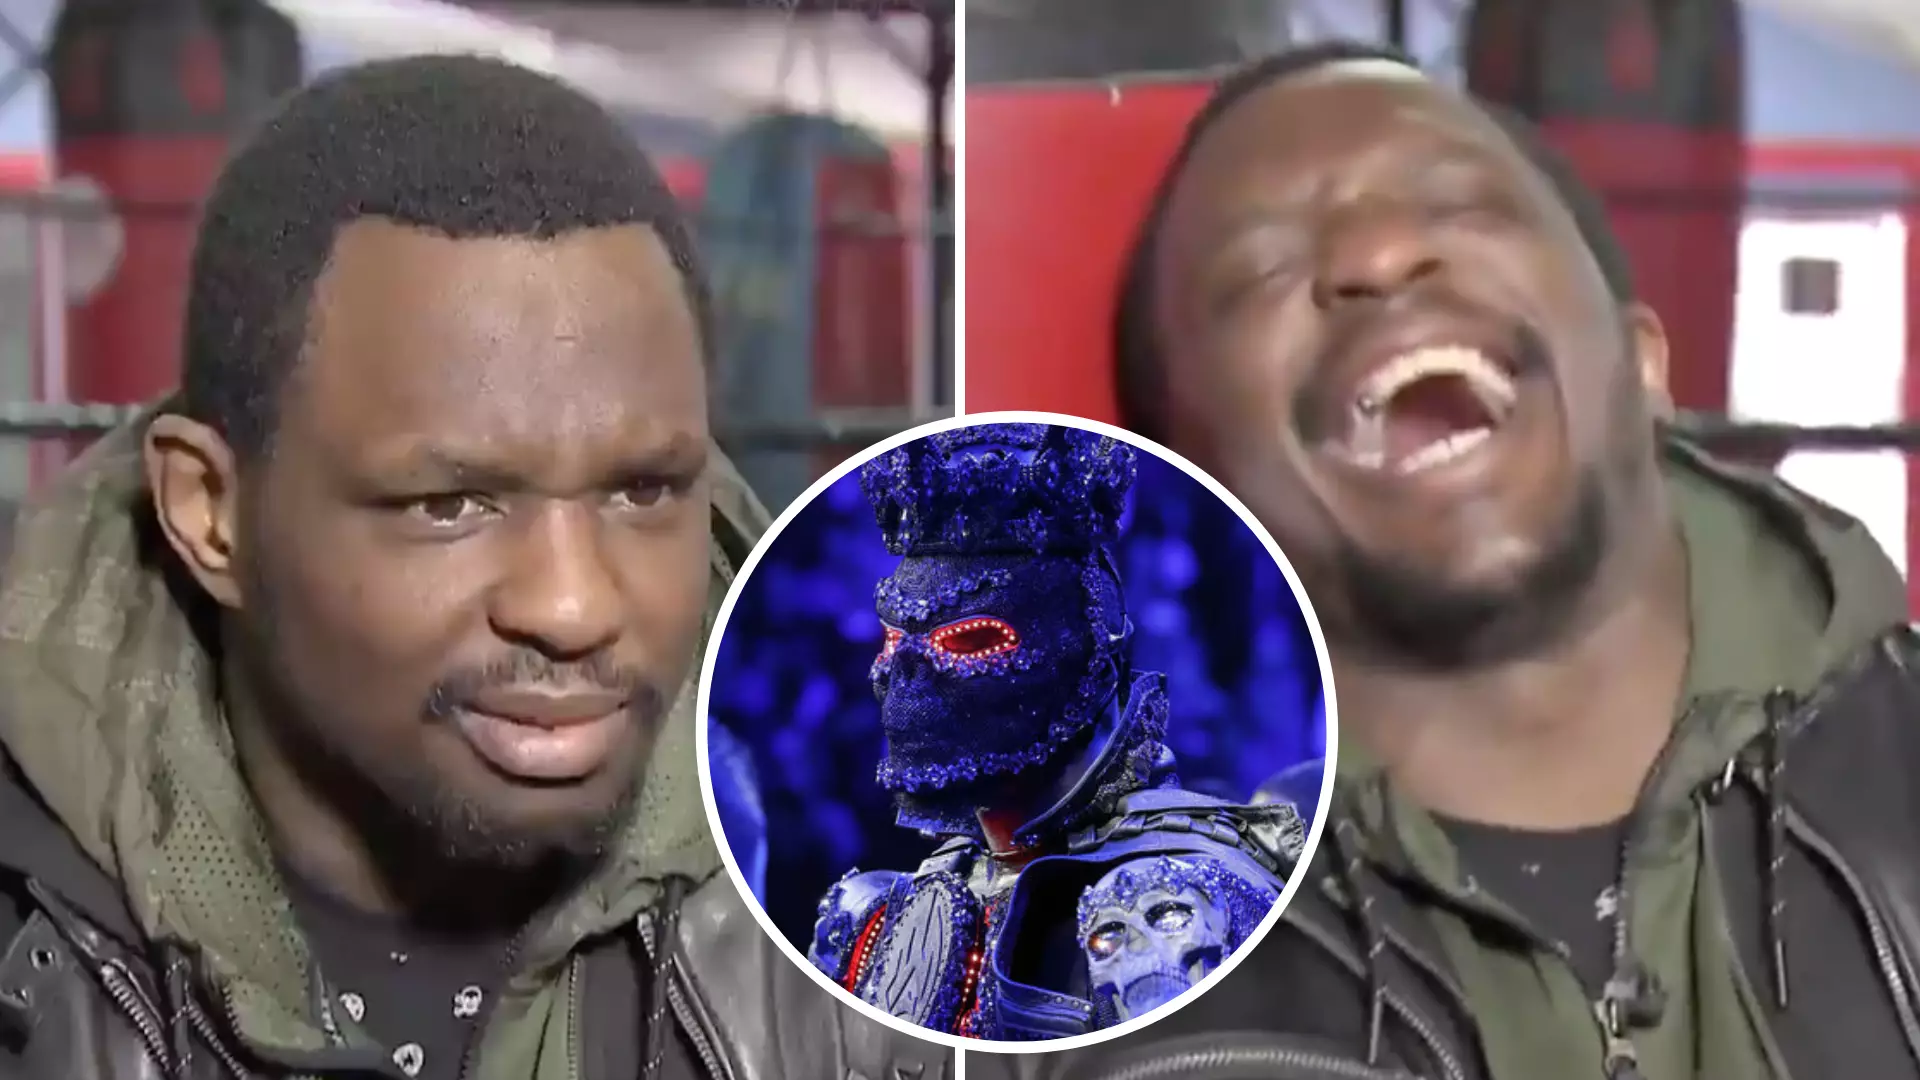 Dillian Whyte’s Reaction To Deontay Wilder’s Costume Excuse Is Absolutely Priceless